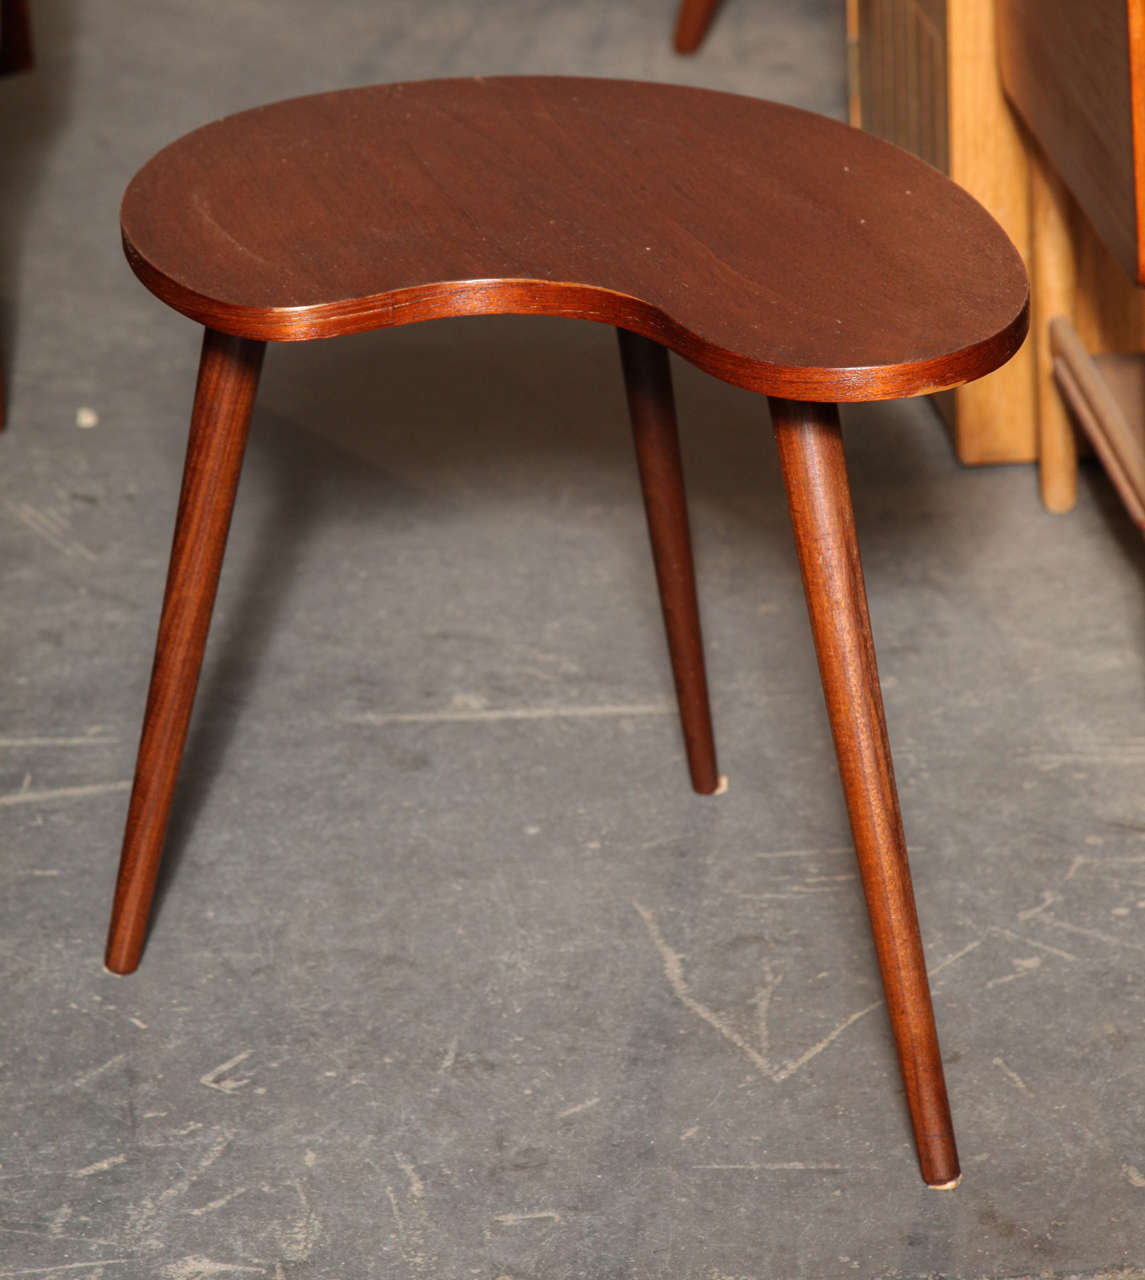 Vintage 1950s Danish Modern Teak Side Table.

This Atomic Table is in beautiful condition, so sculptural that you could just place it in a room without putting anything on top and it stands alone as a piece of art. Great in the living room to